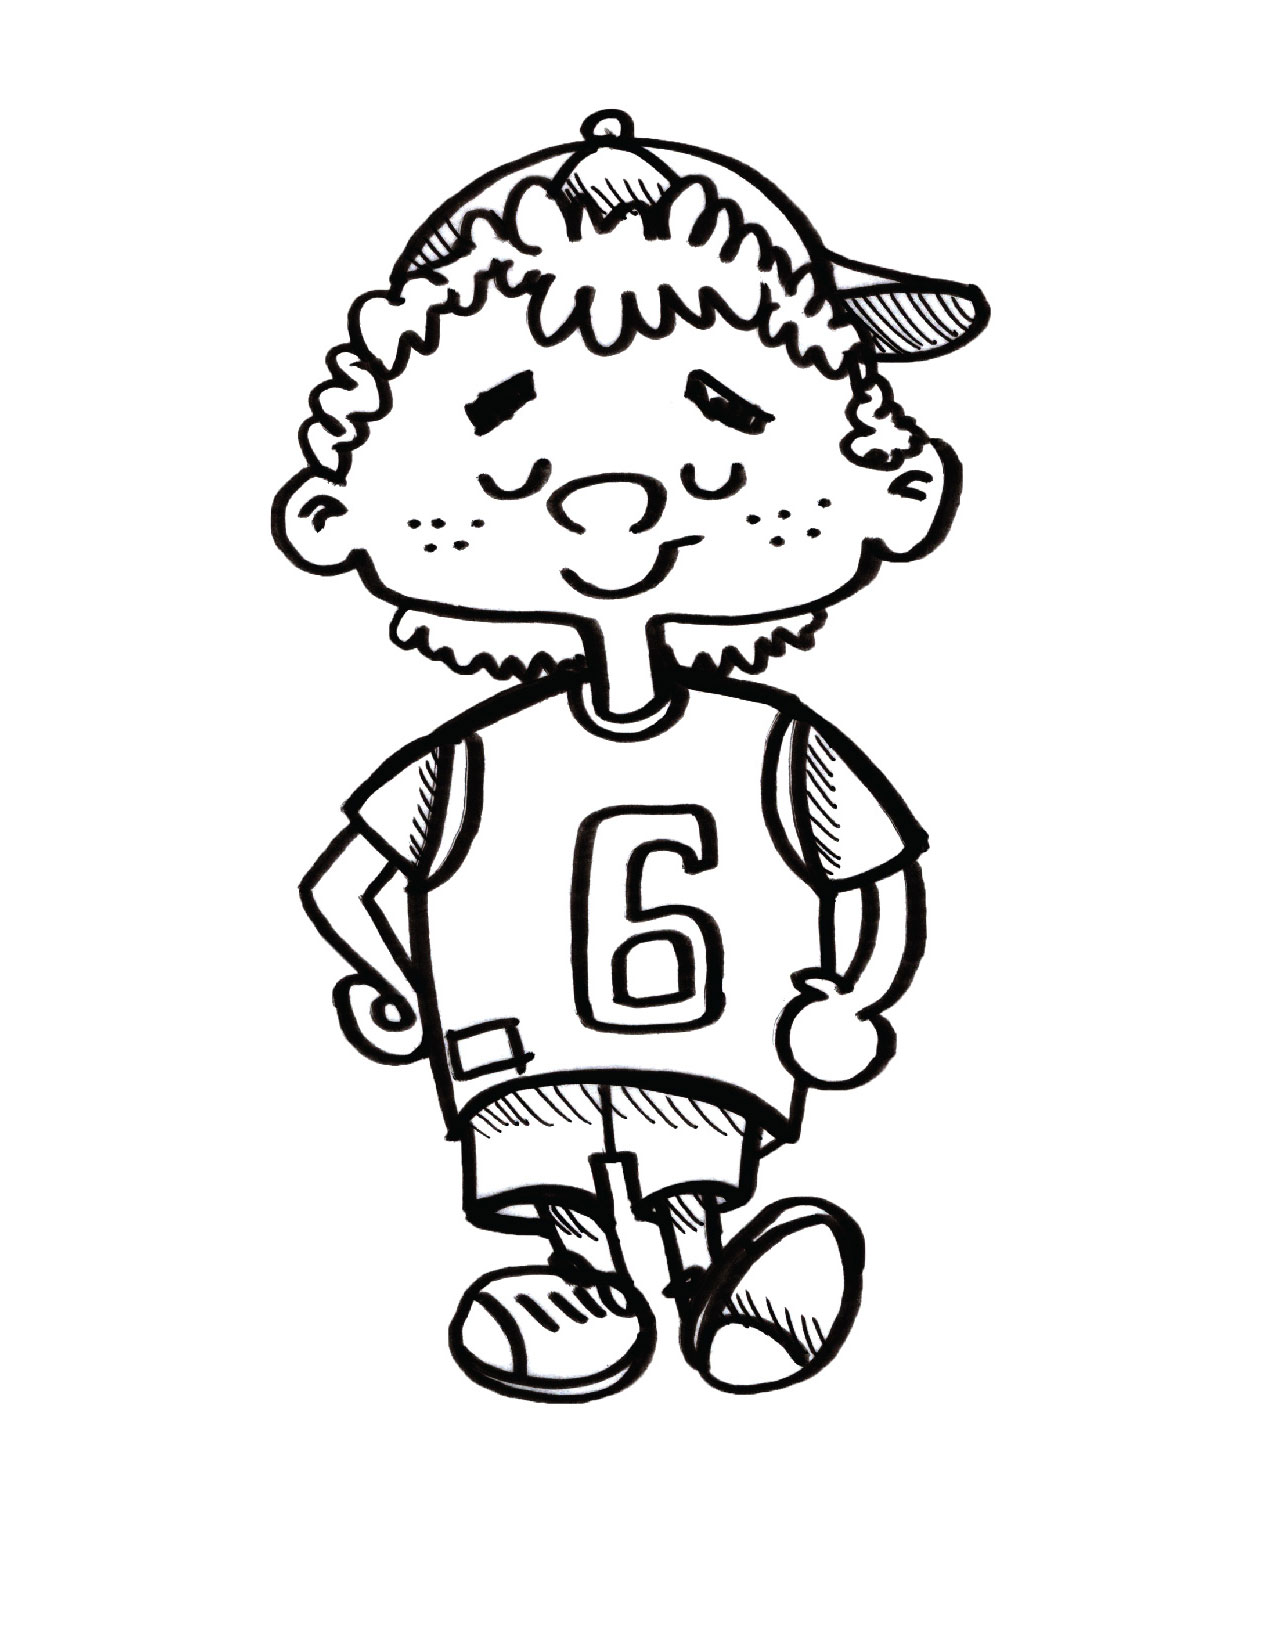 Boy in basketball uniform coloring page